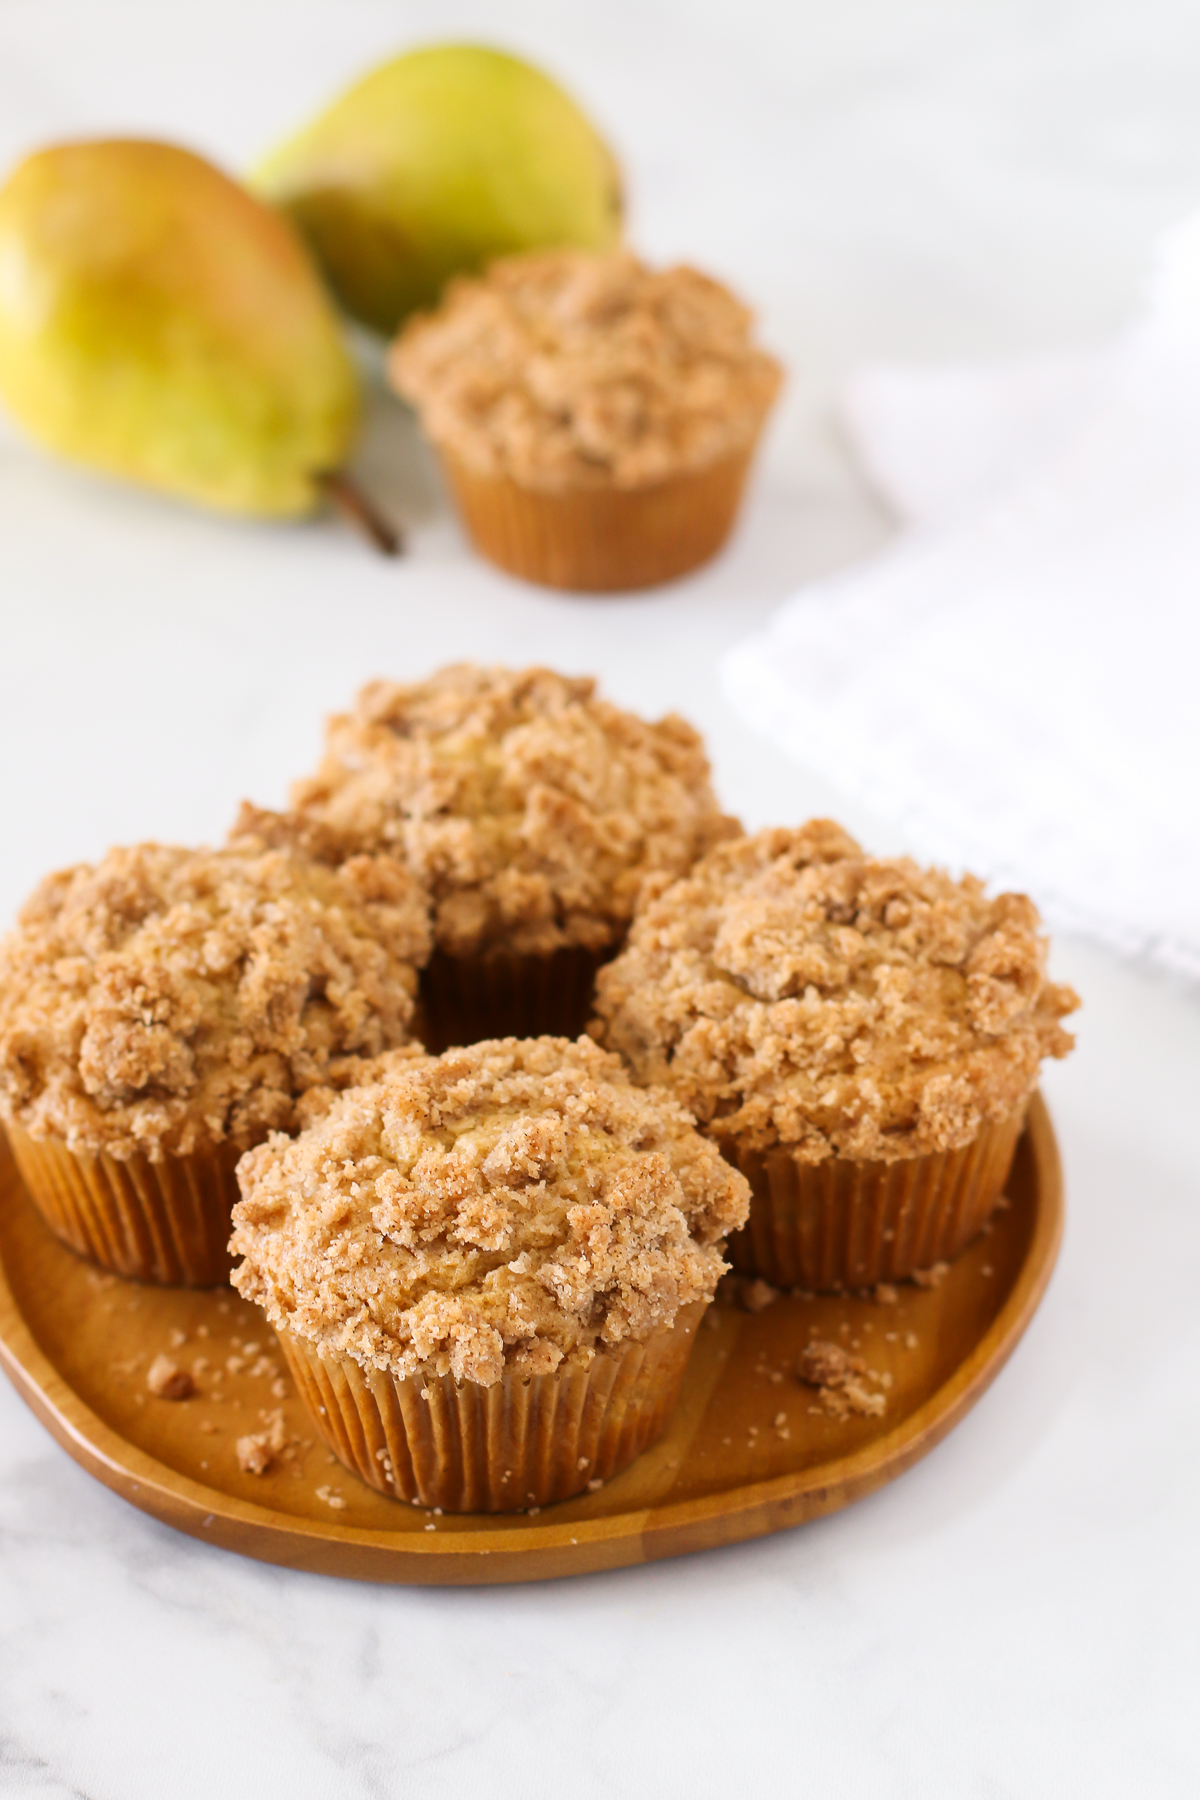 Gluten Free Vegan Pear Crumb Muffins. Tender, spiced muffins with diced fresh pears. A lovely fall breakfast treat!